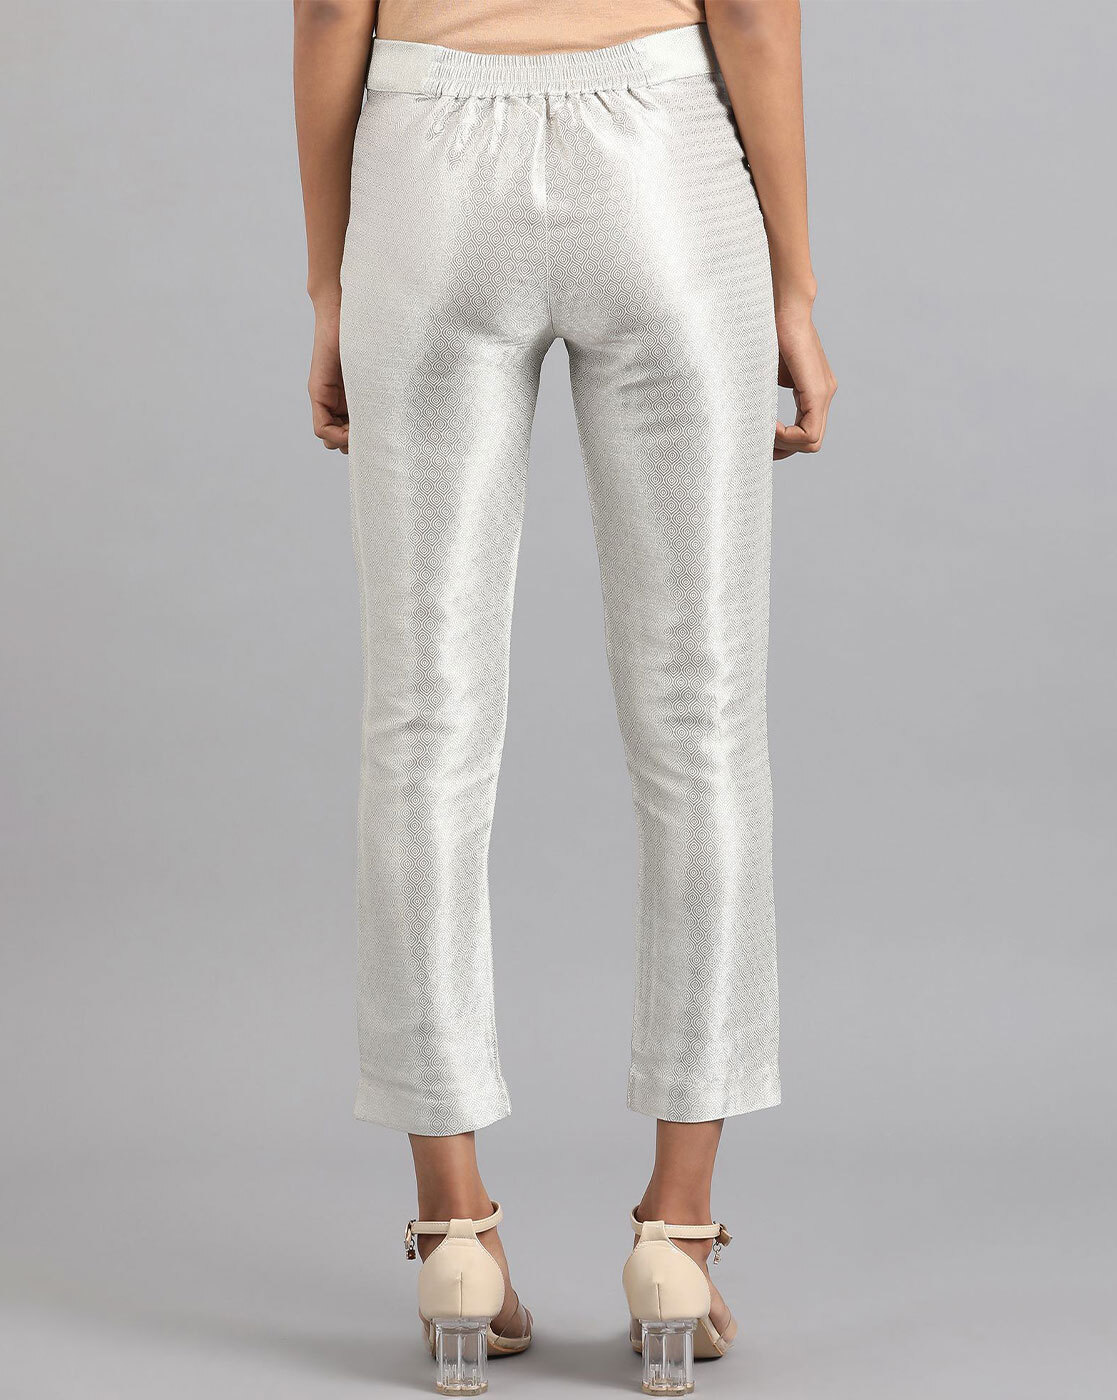 Silver trousers hot tend alert 9 best silver trousers youve seen all over  Instagram  HELLO